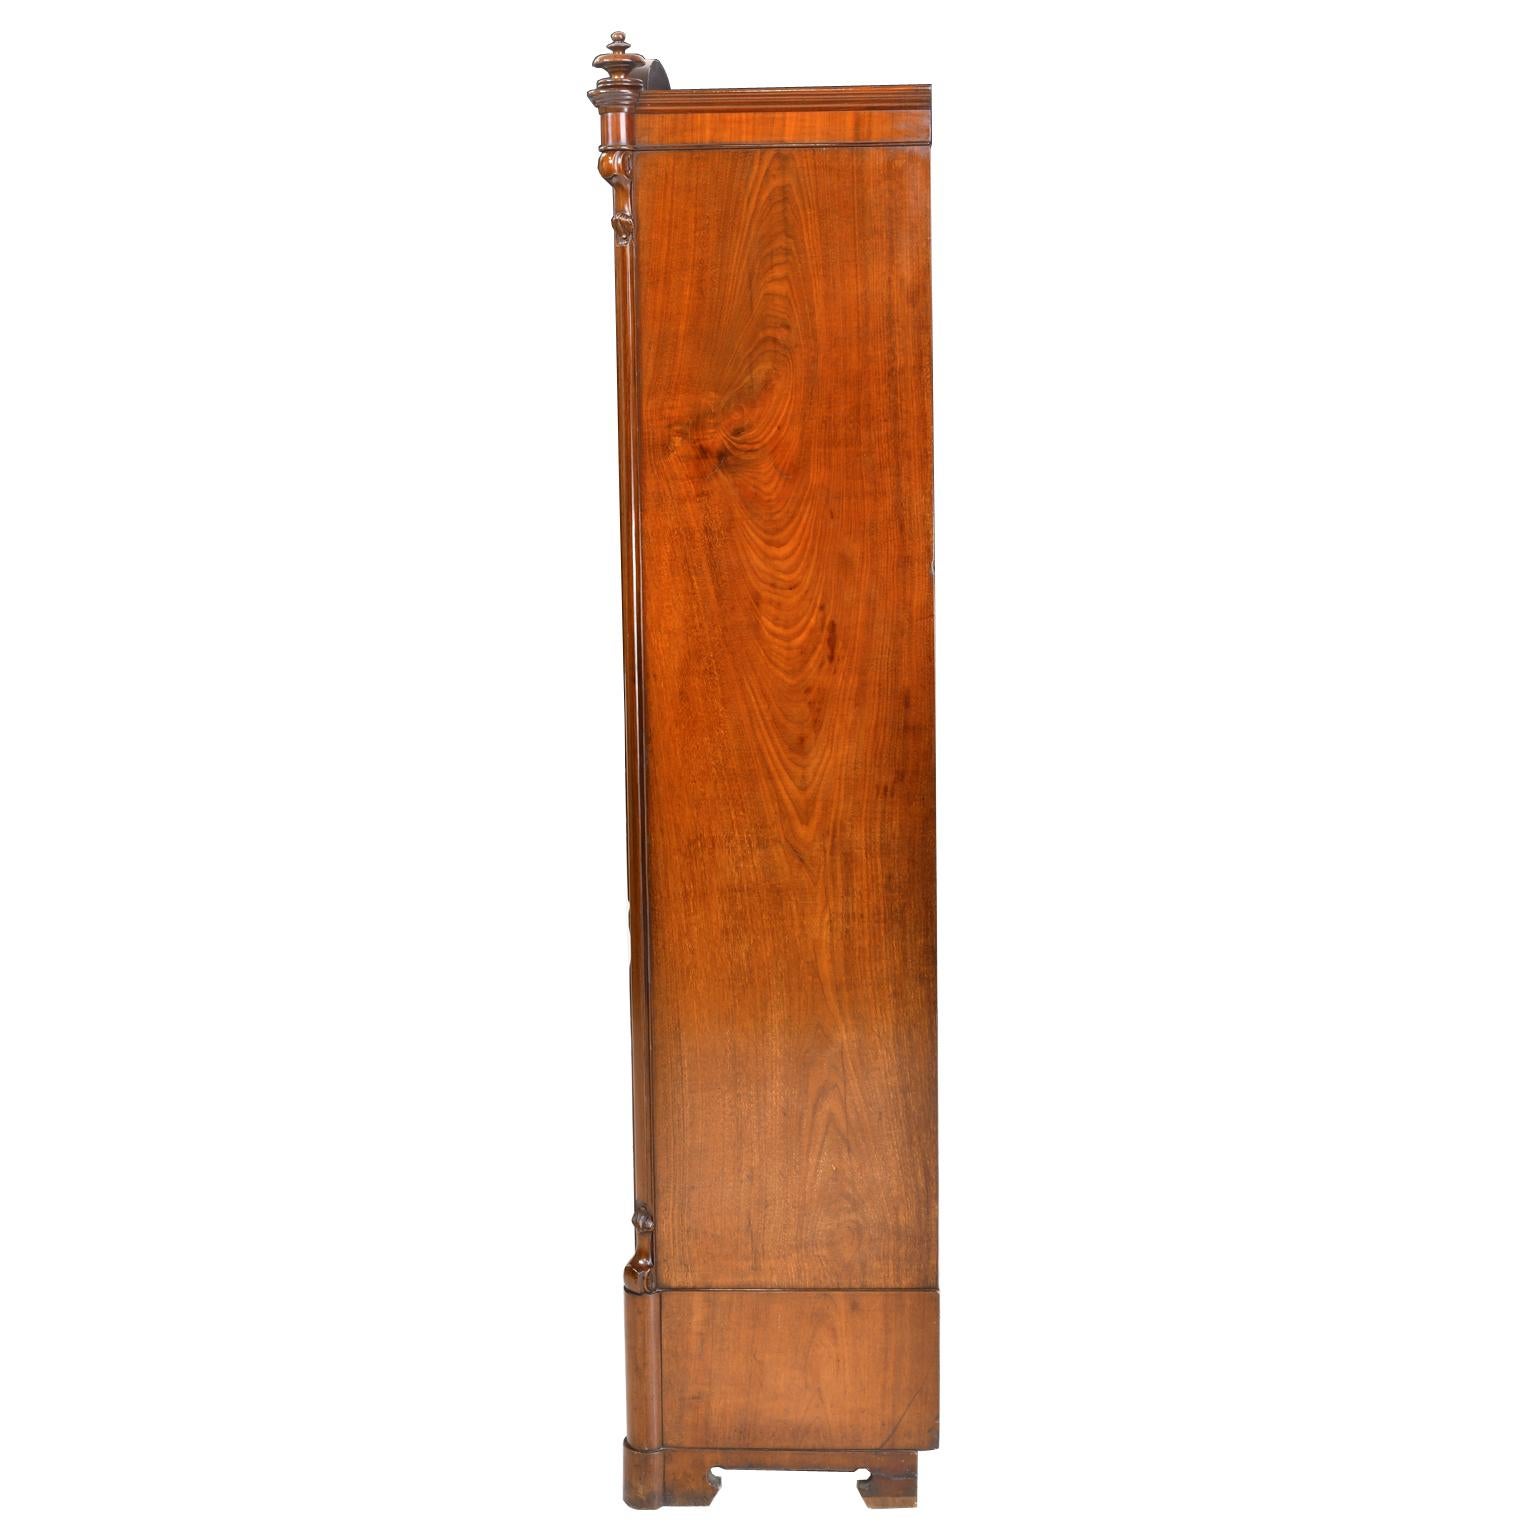 Hand-Crafted Antique Louis Philippe Bookcase / Vitrine in West Indies Mahogany, German